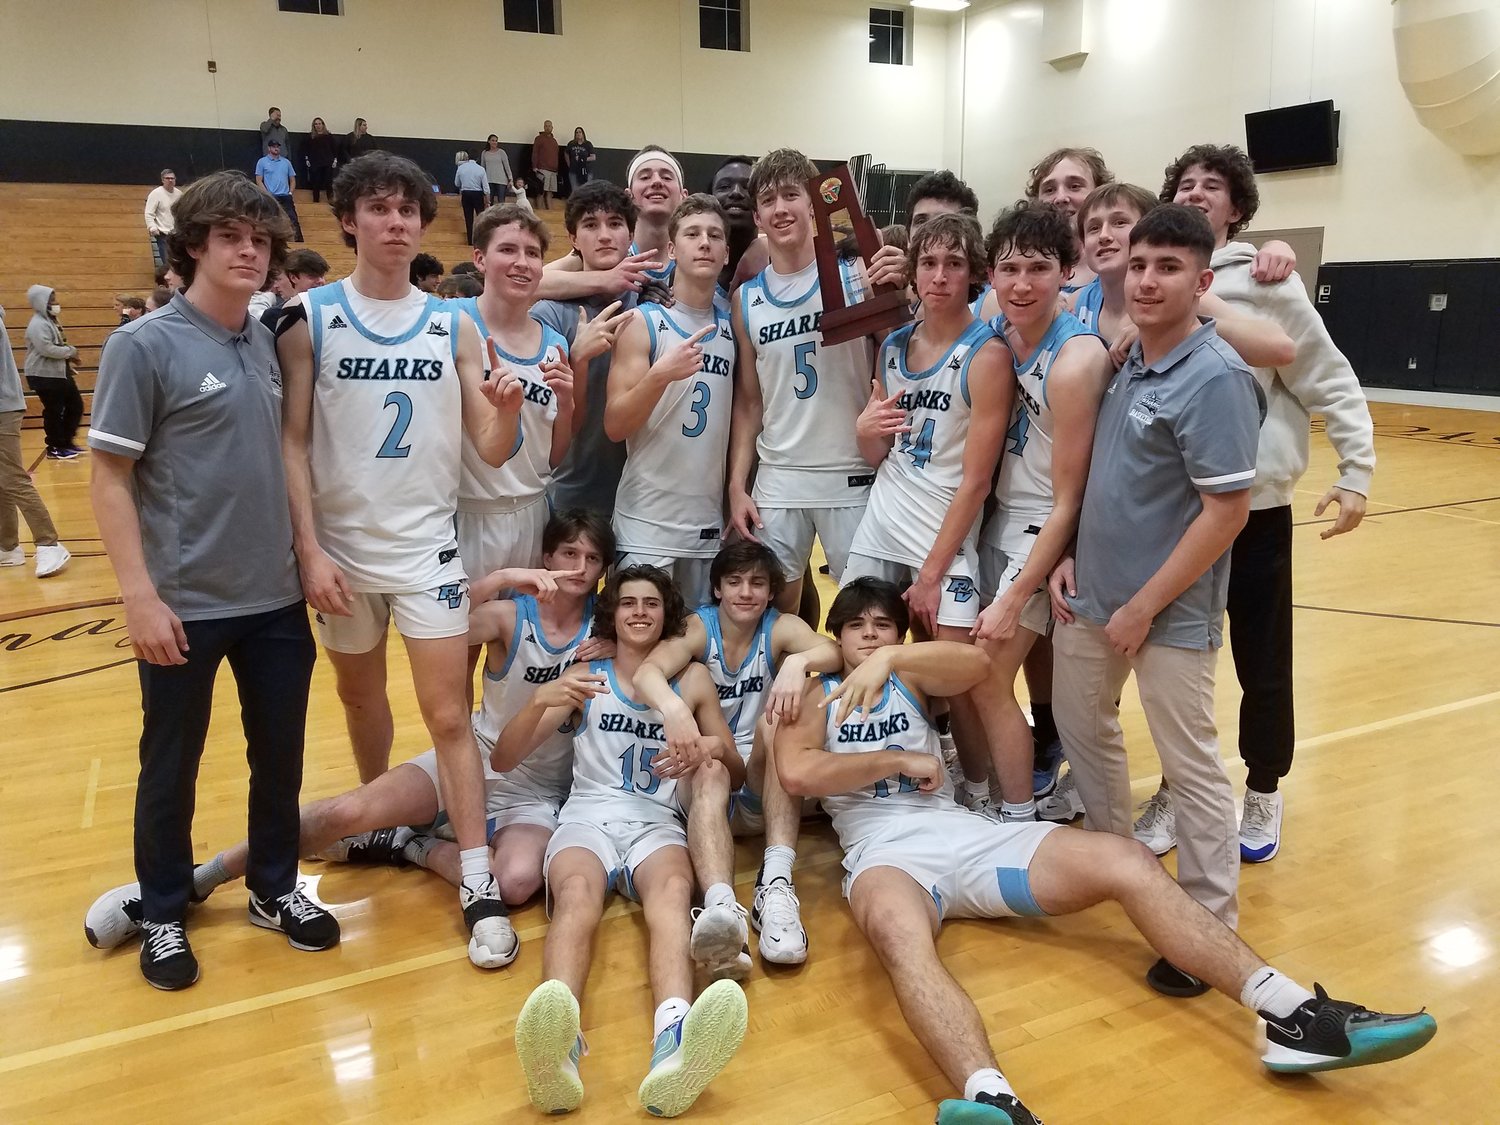 The Sharks defeated the Senators 41-37 in overtime to secure the district title Feb. 11.